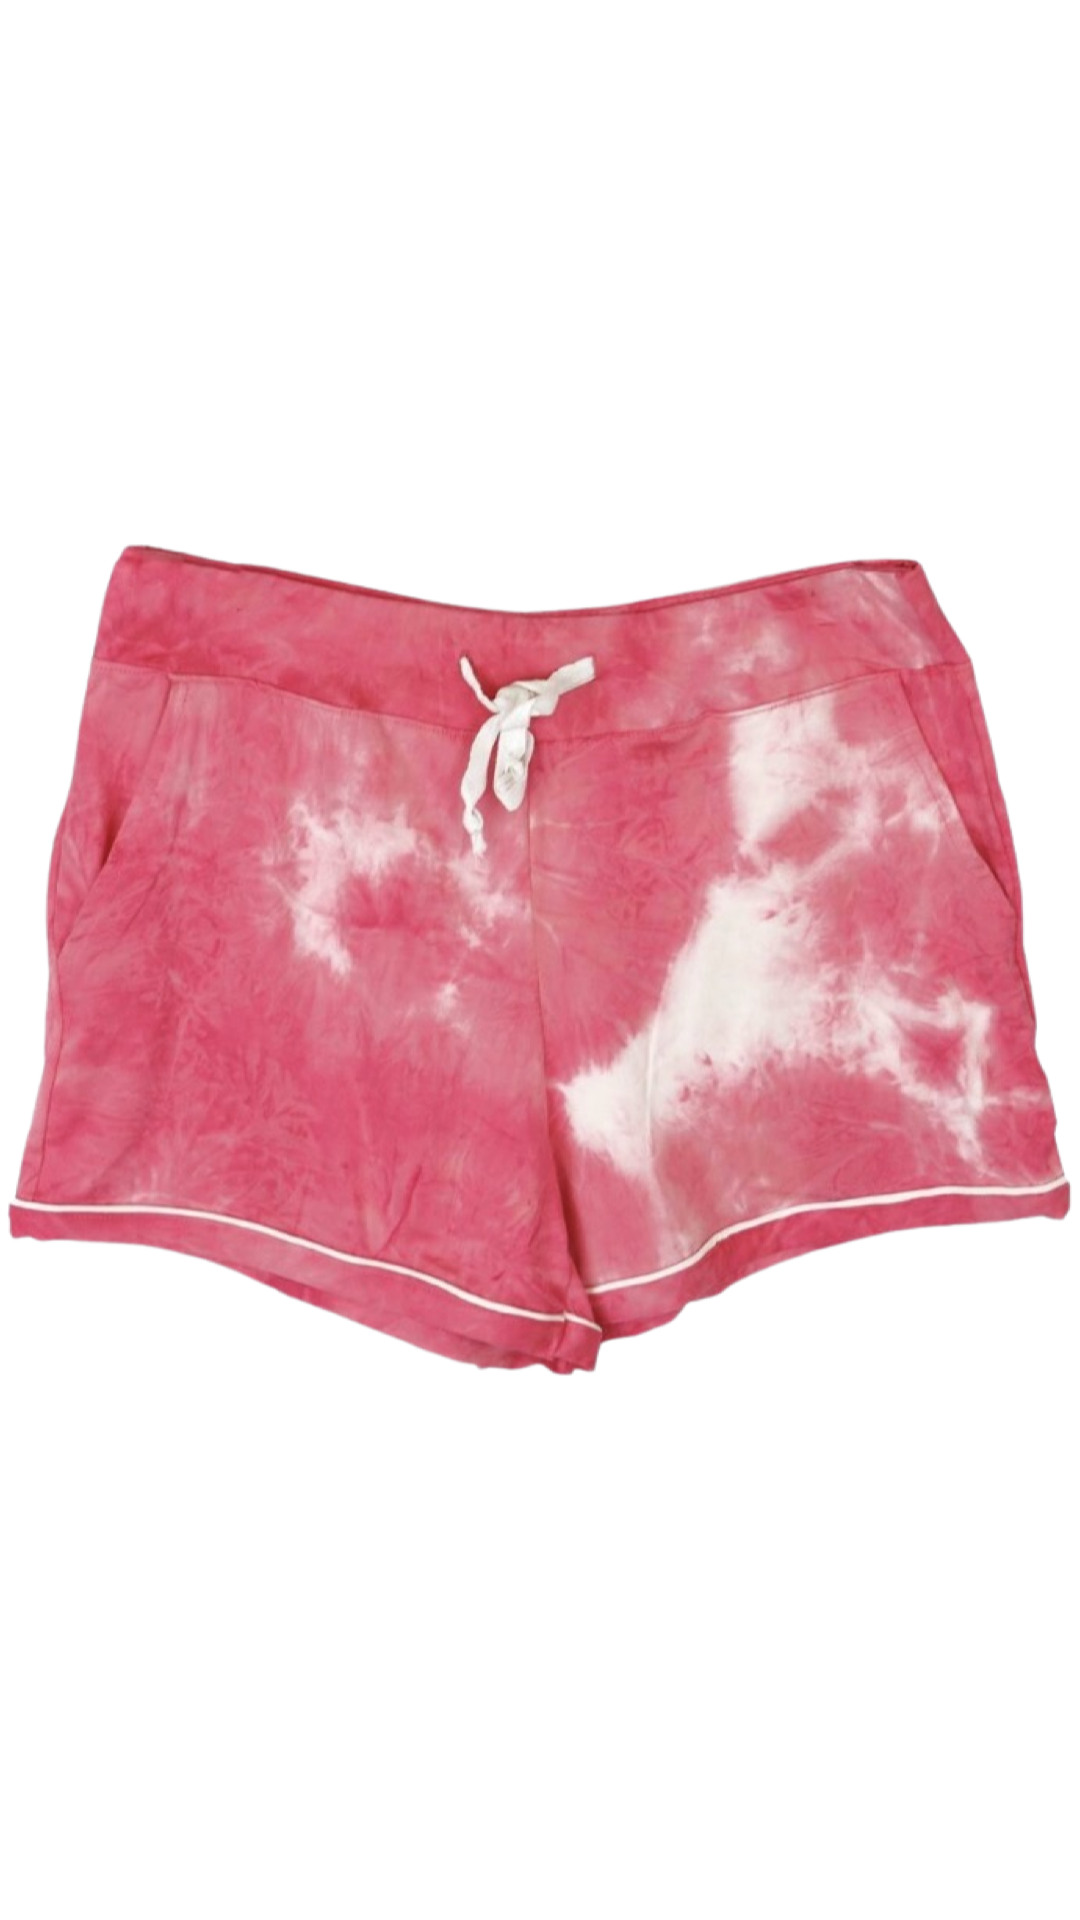 Apparel- Hello Mello Dyes The Limit Lounge Shorts Coral